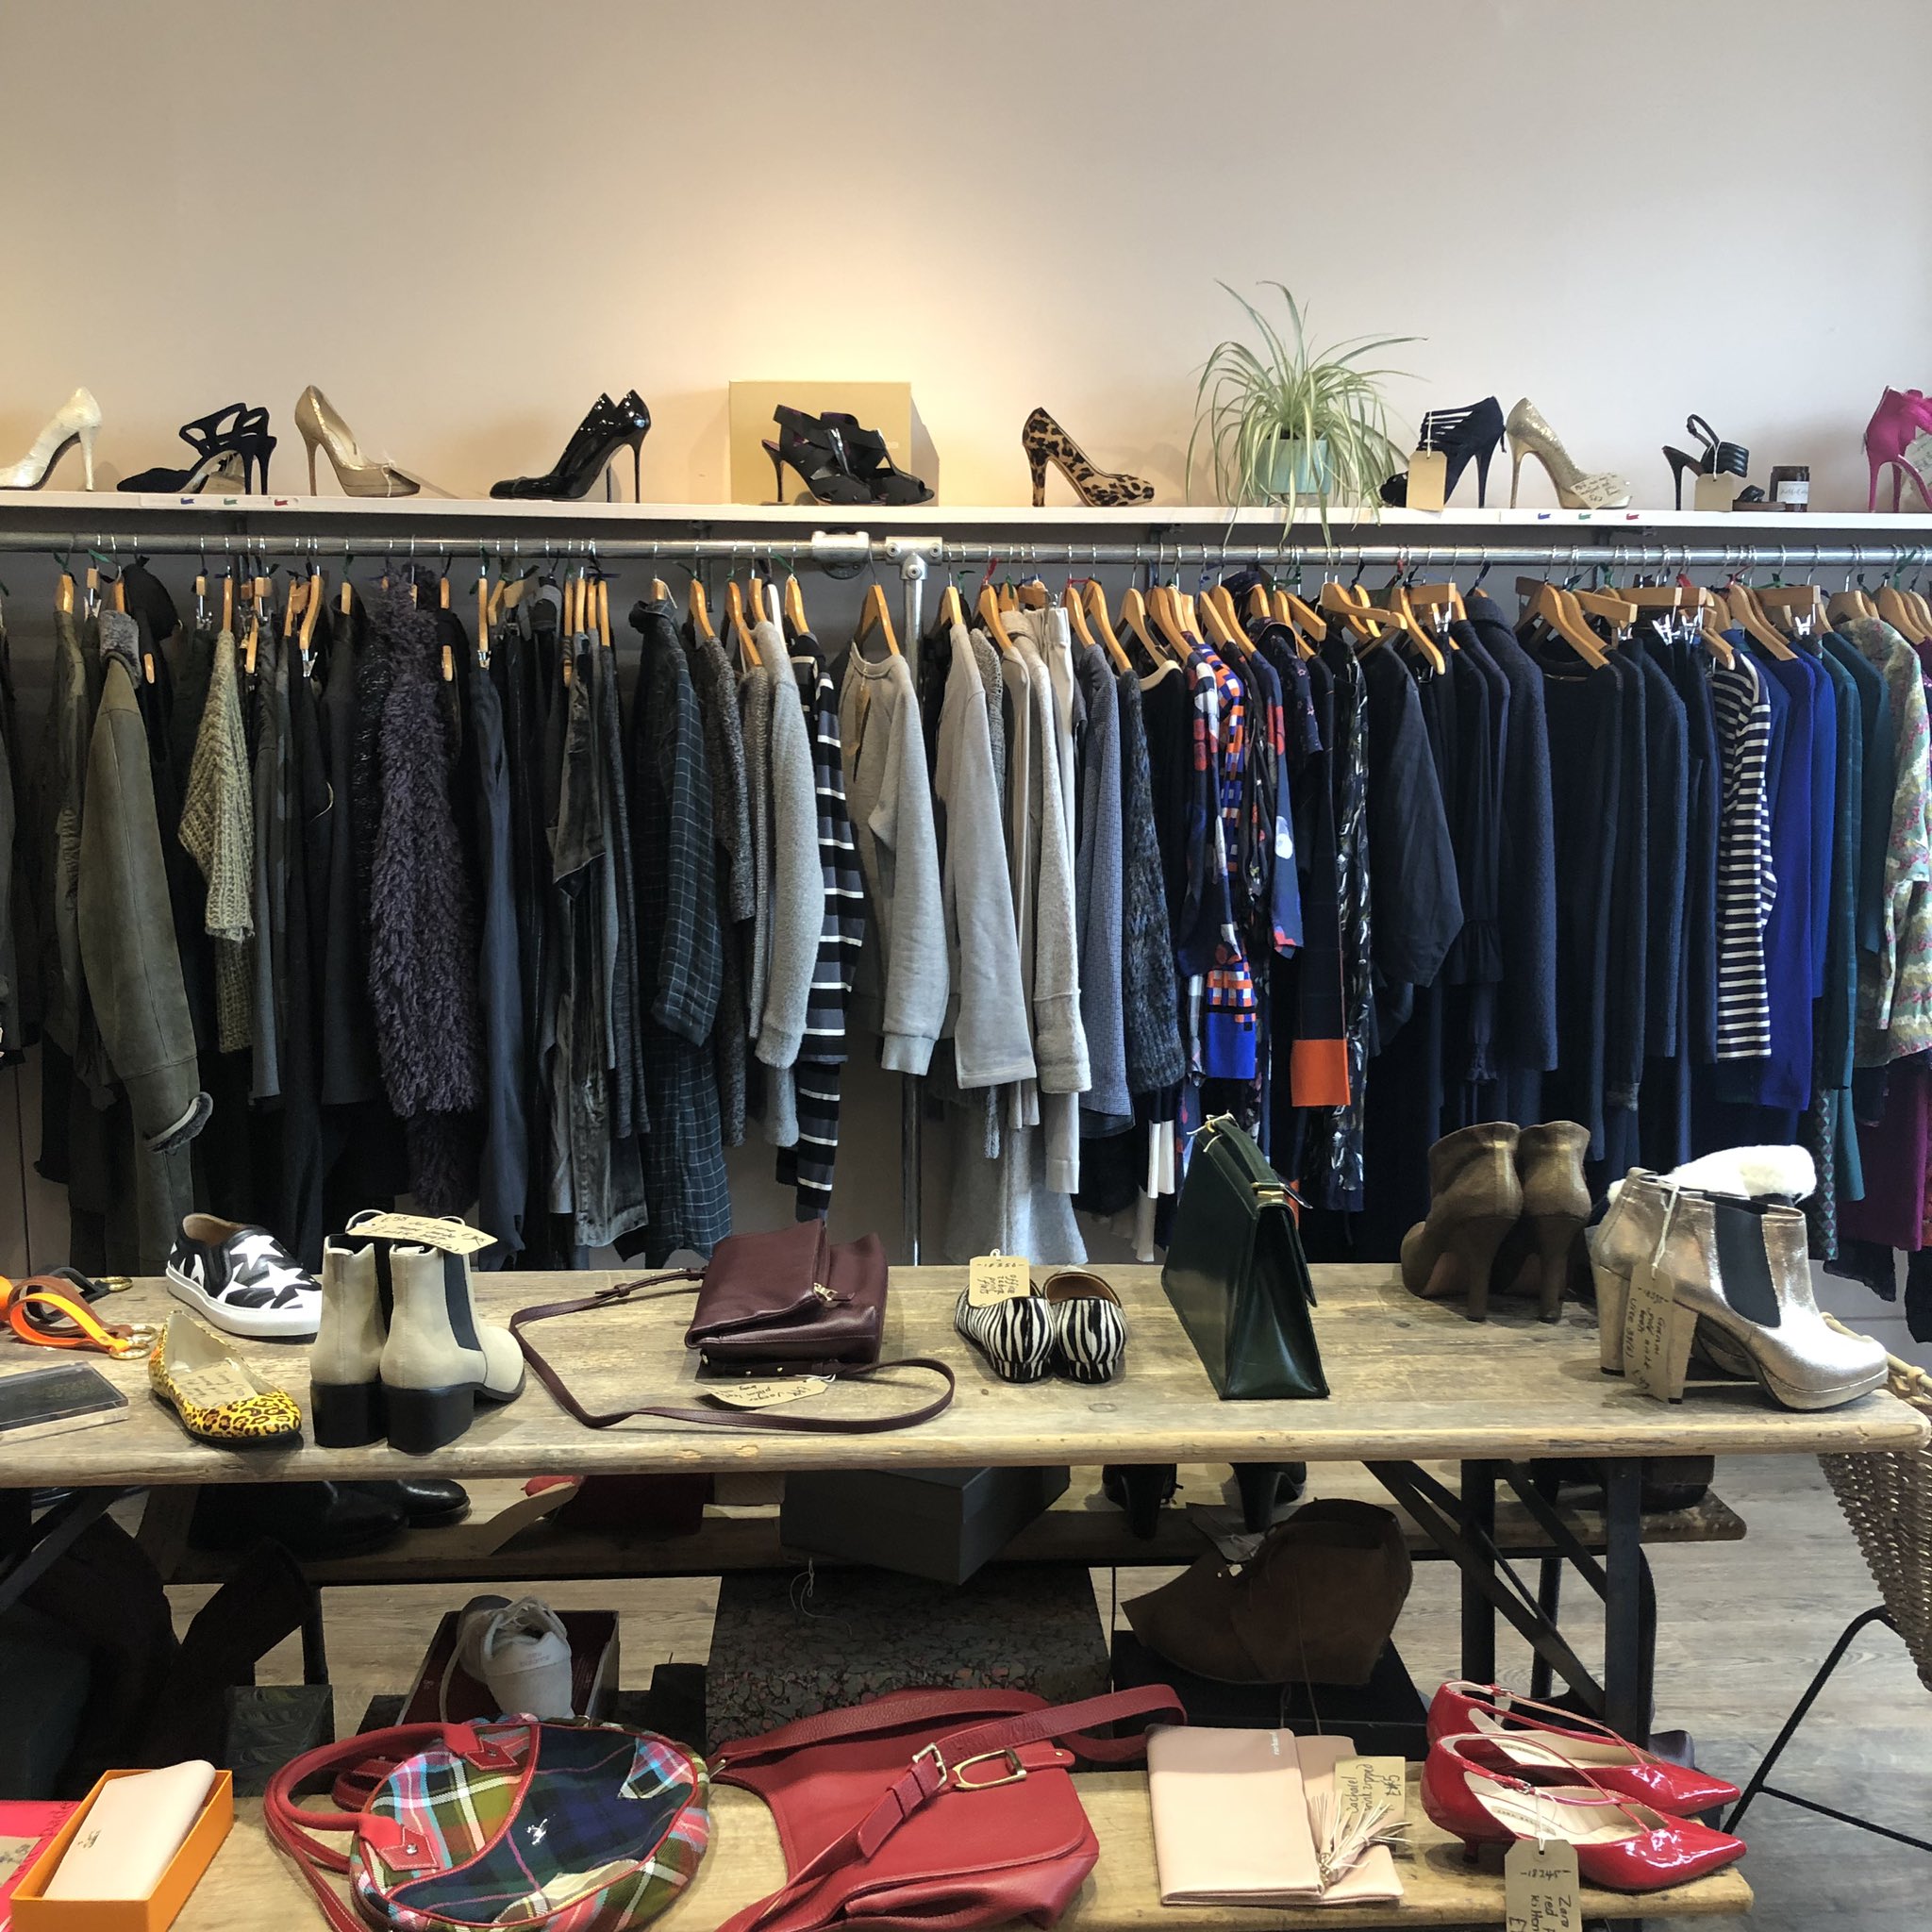 Preloved of Brighton on Twitter: "The shop today.. from Cos &amp; Toast to Jimmy Choo &amp; Vivienne Westwood.. buying second hand clothes is such a great idea.. kind to the environment and